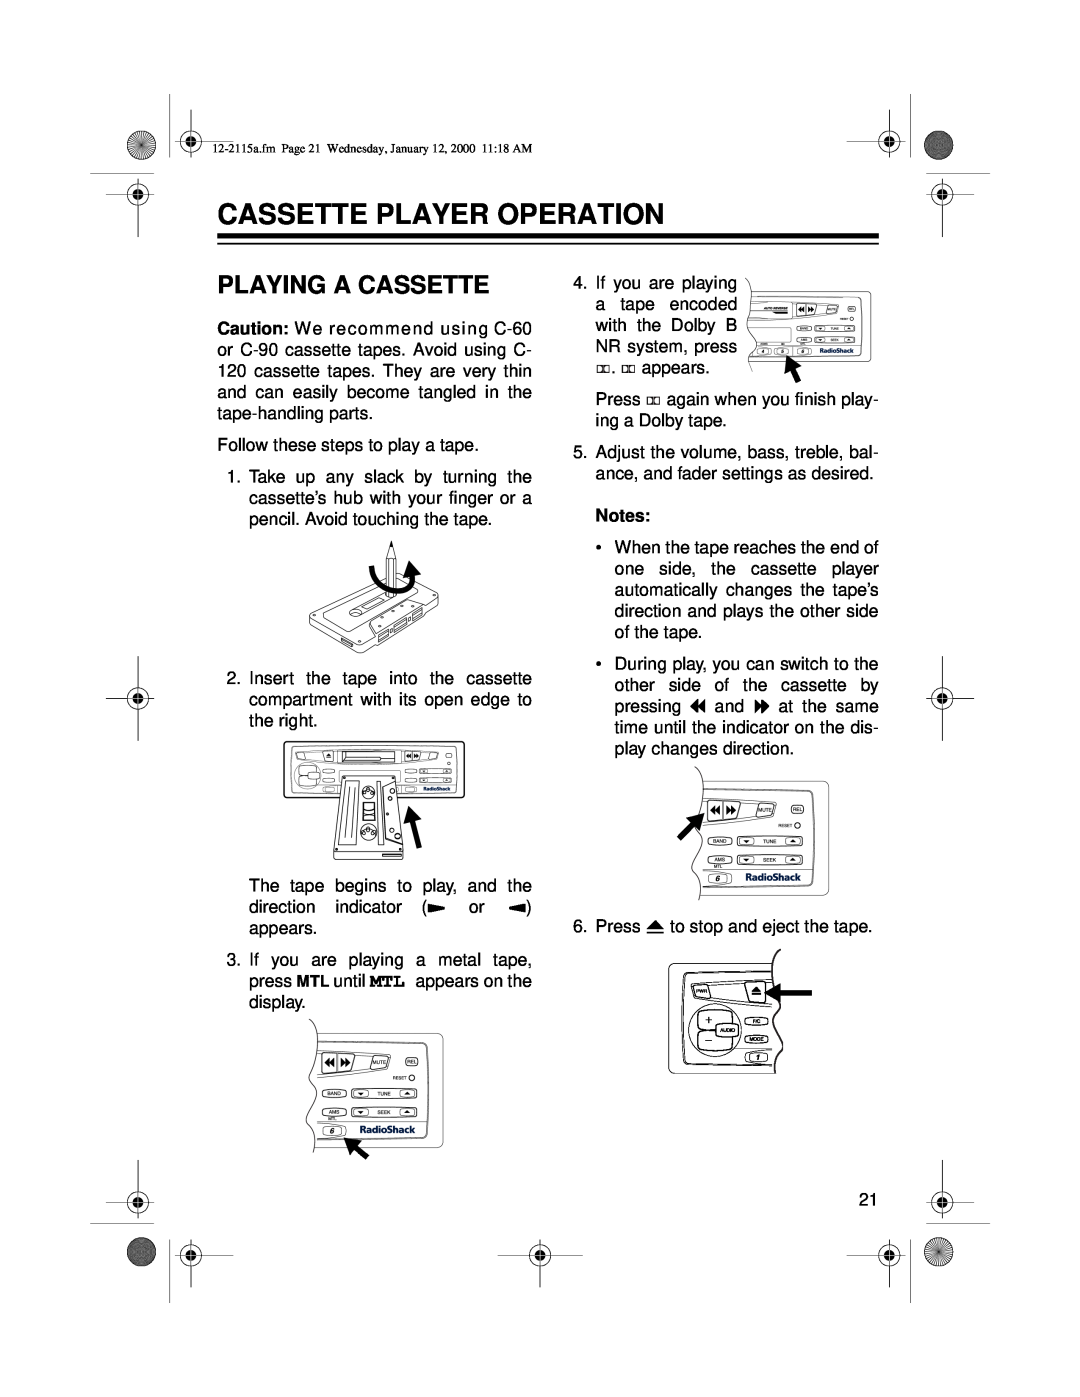 Radio Shack AM/FM Stereo Cassette owner manual Cassette Player Operation, Playing A Cassette 